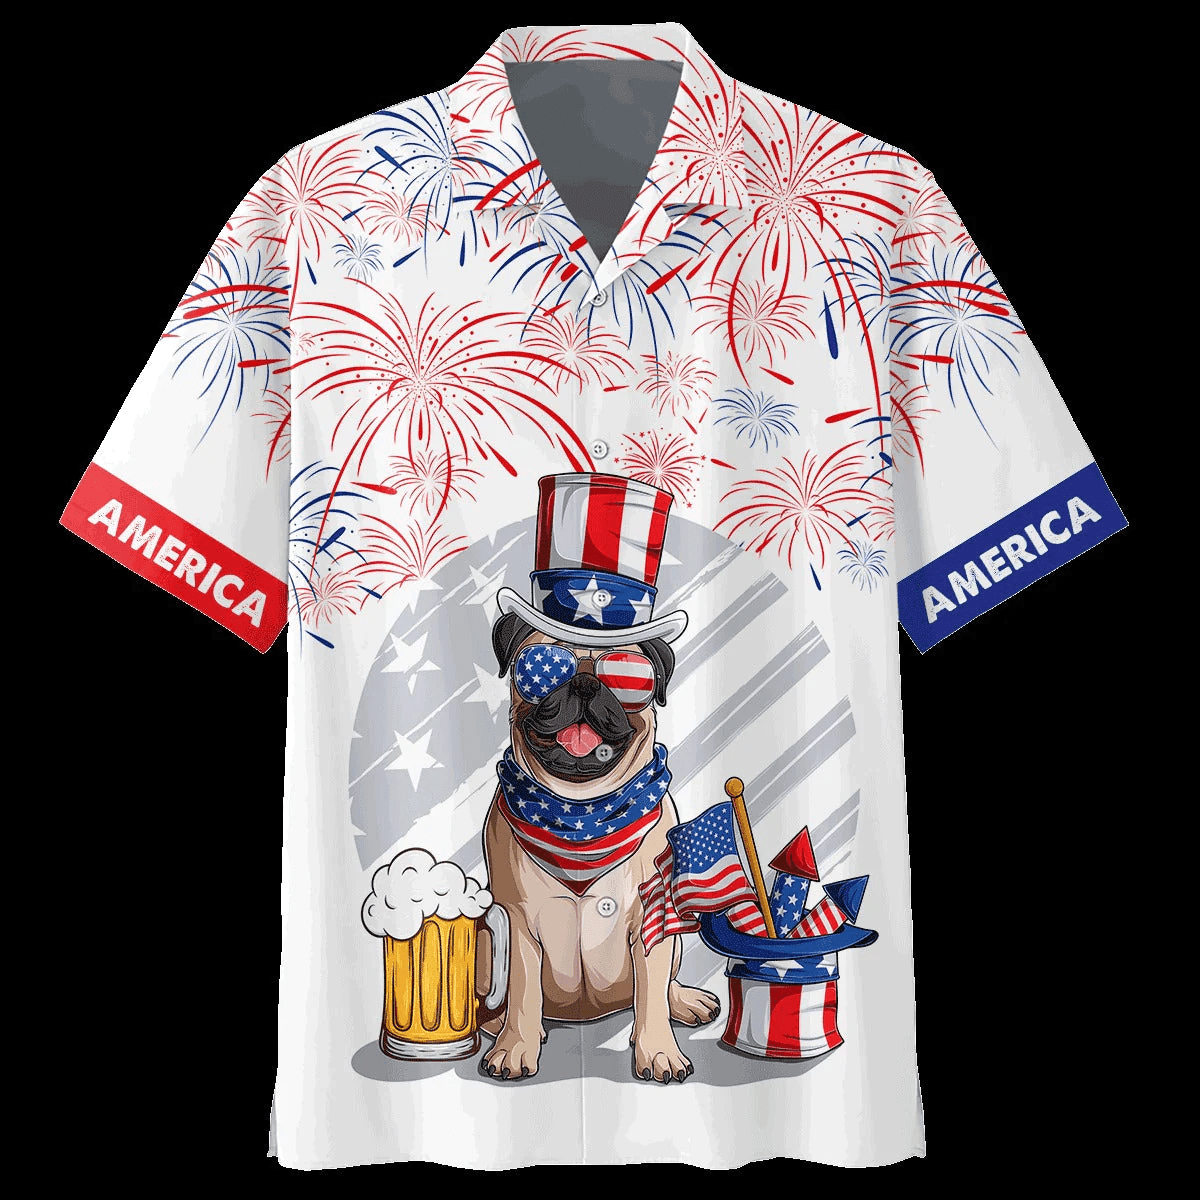 Pug And Beer Aloha Hawaiian Shirts For Summer, Pug Dog Independence Day Aloha Hawaiian Shirt For Men Women, Fourth Of July Apparel Gift For Dog Lovers - Amzanimalsgift